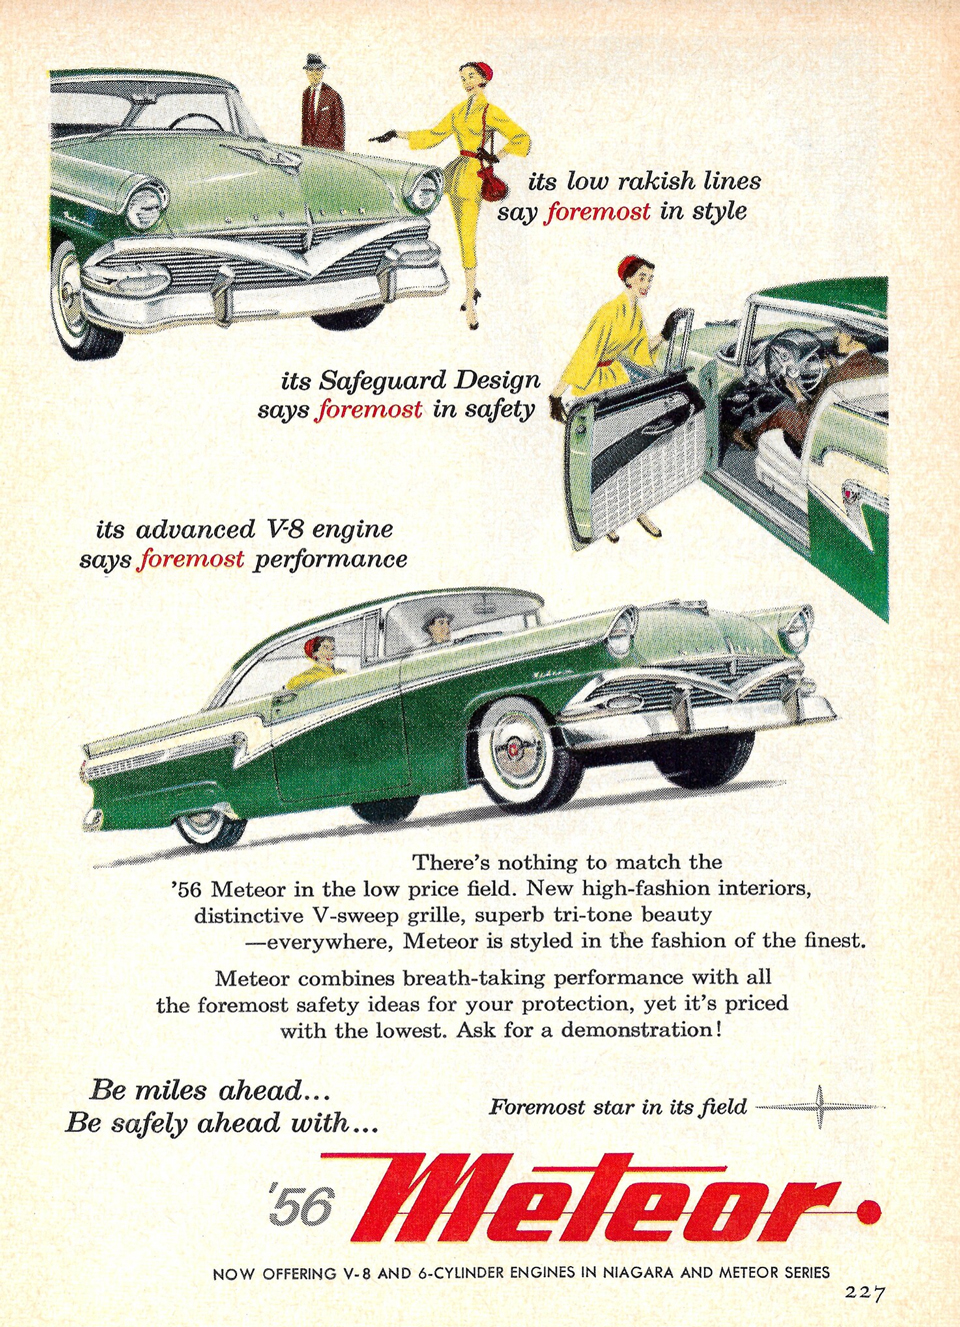 An original 1956 Meteor advertisement "Now offering V-8 and 6-cylinder engines in Niagara and Meteor series"